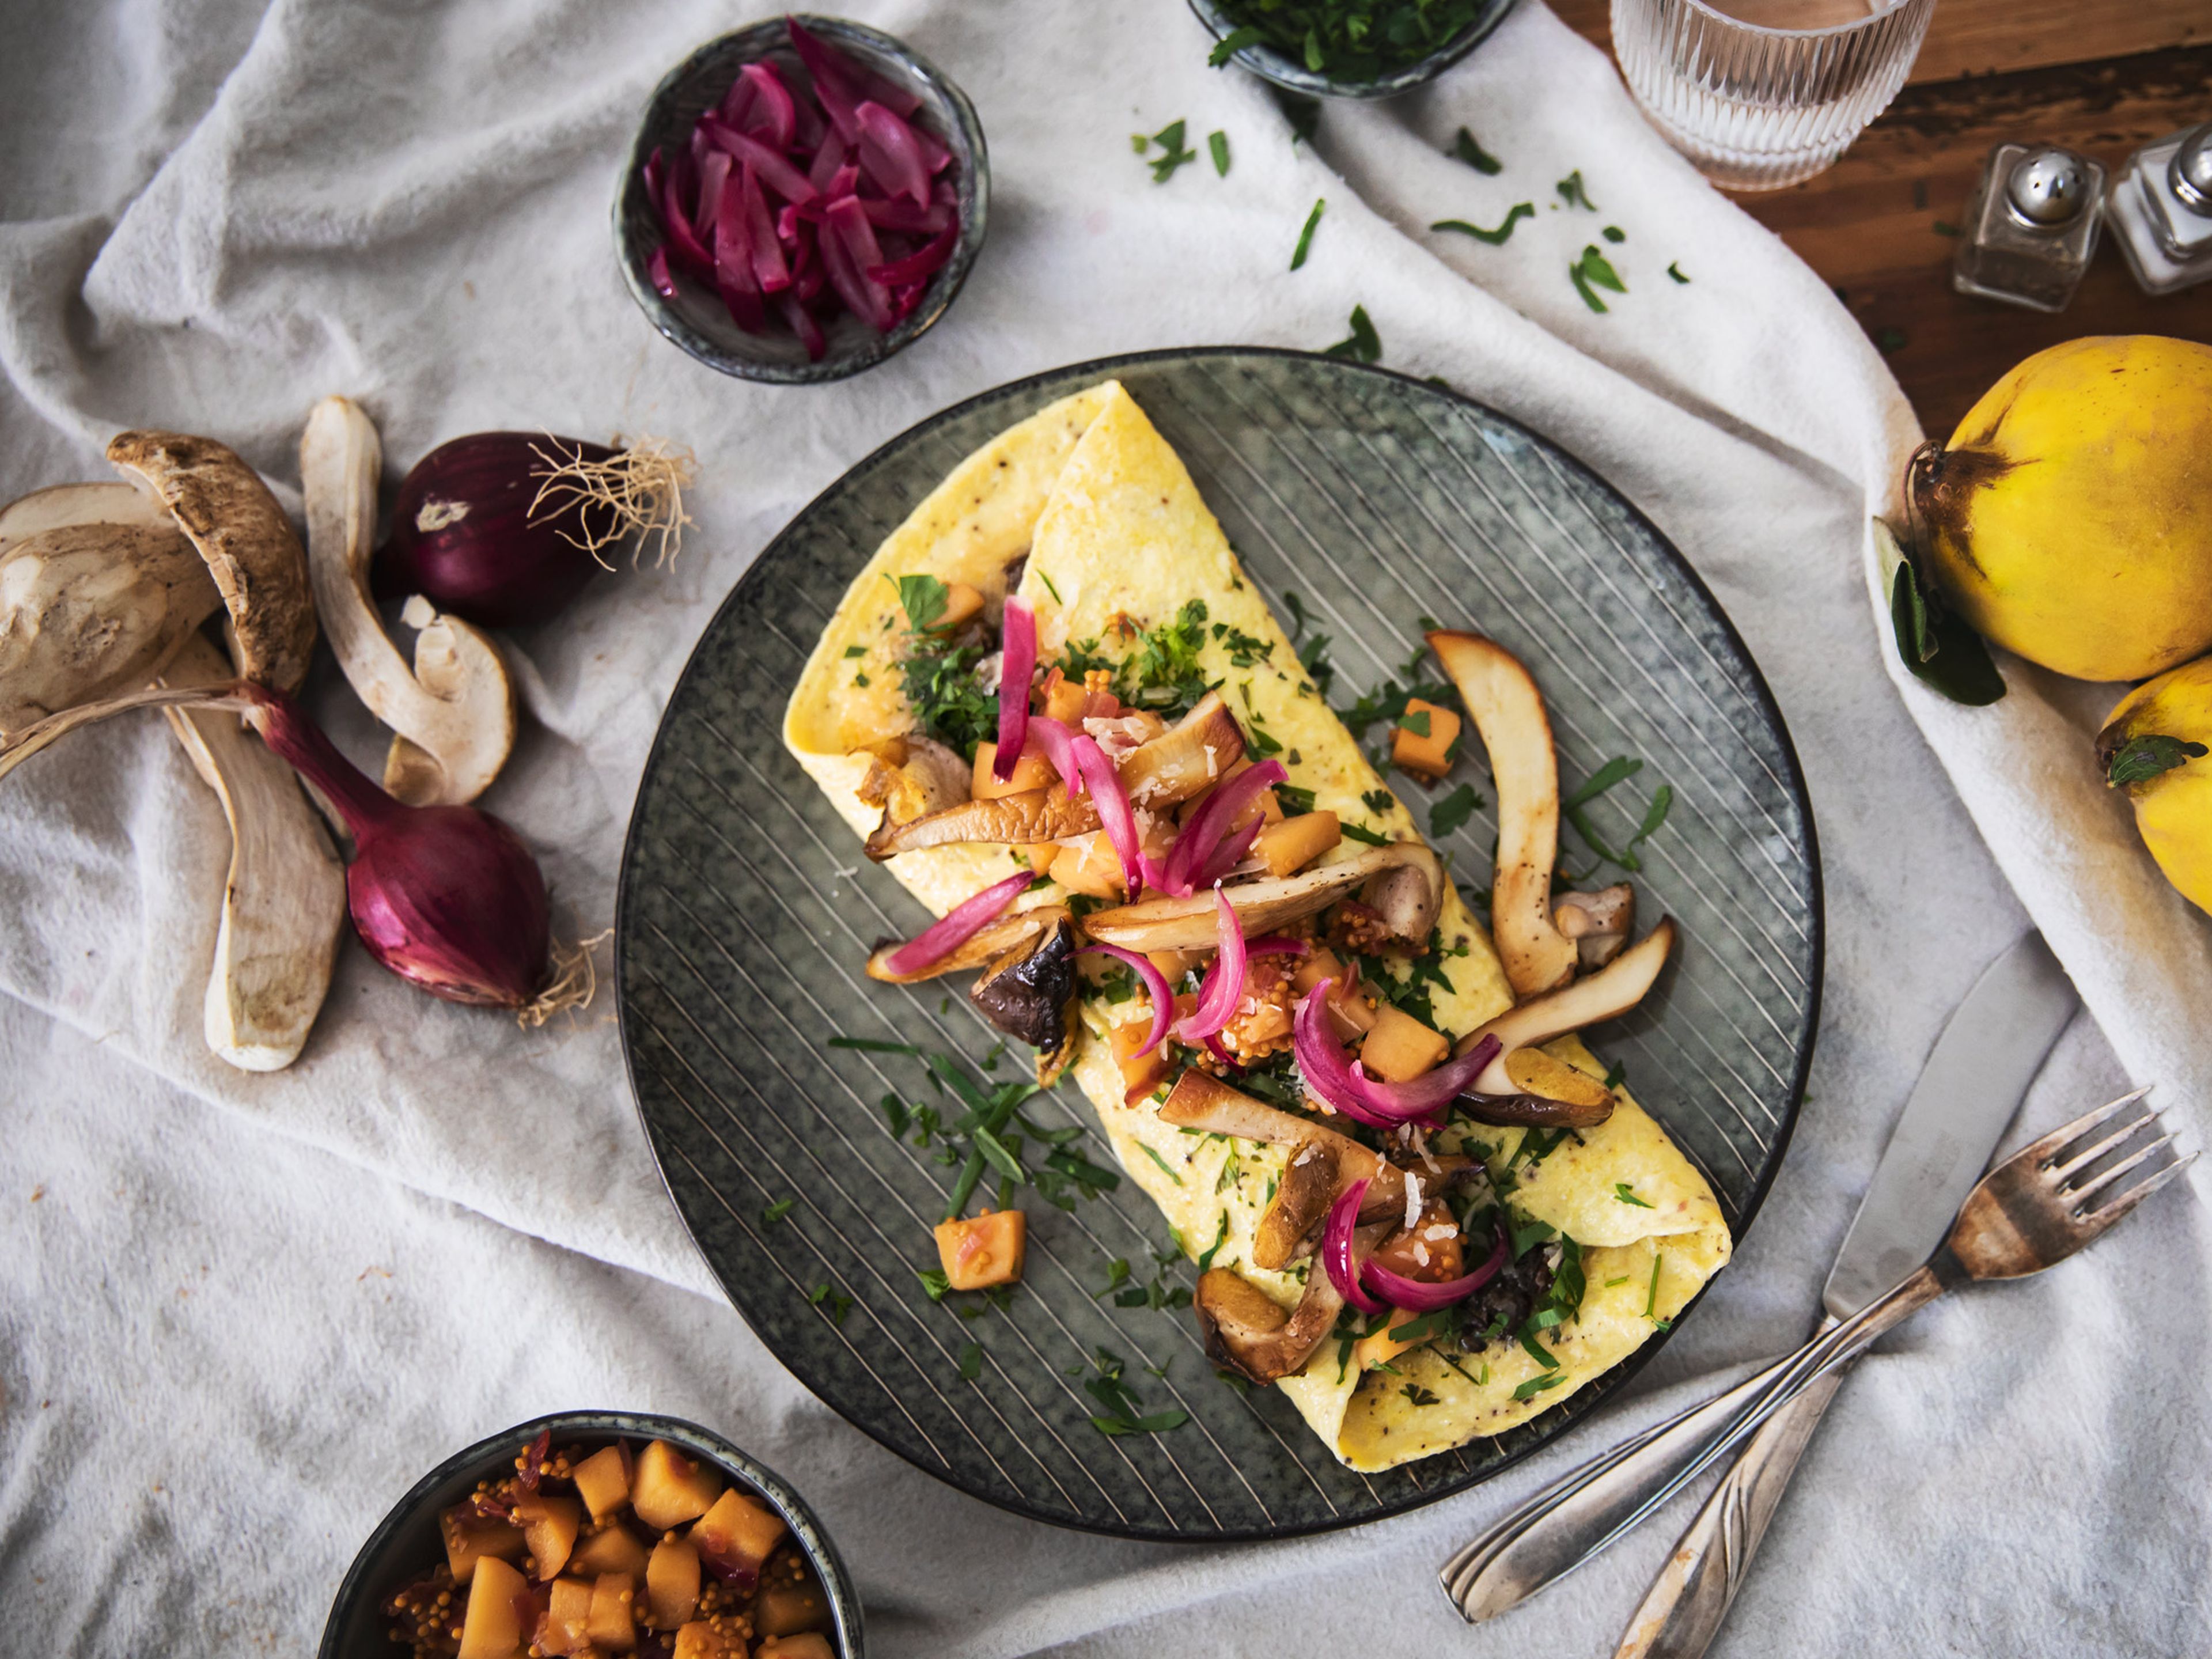 Porcini mushroom omelet with quince relish and pickled red onions